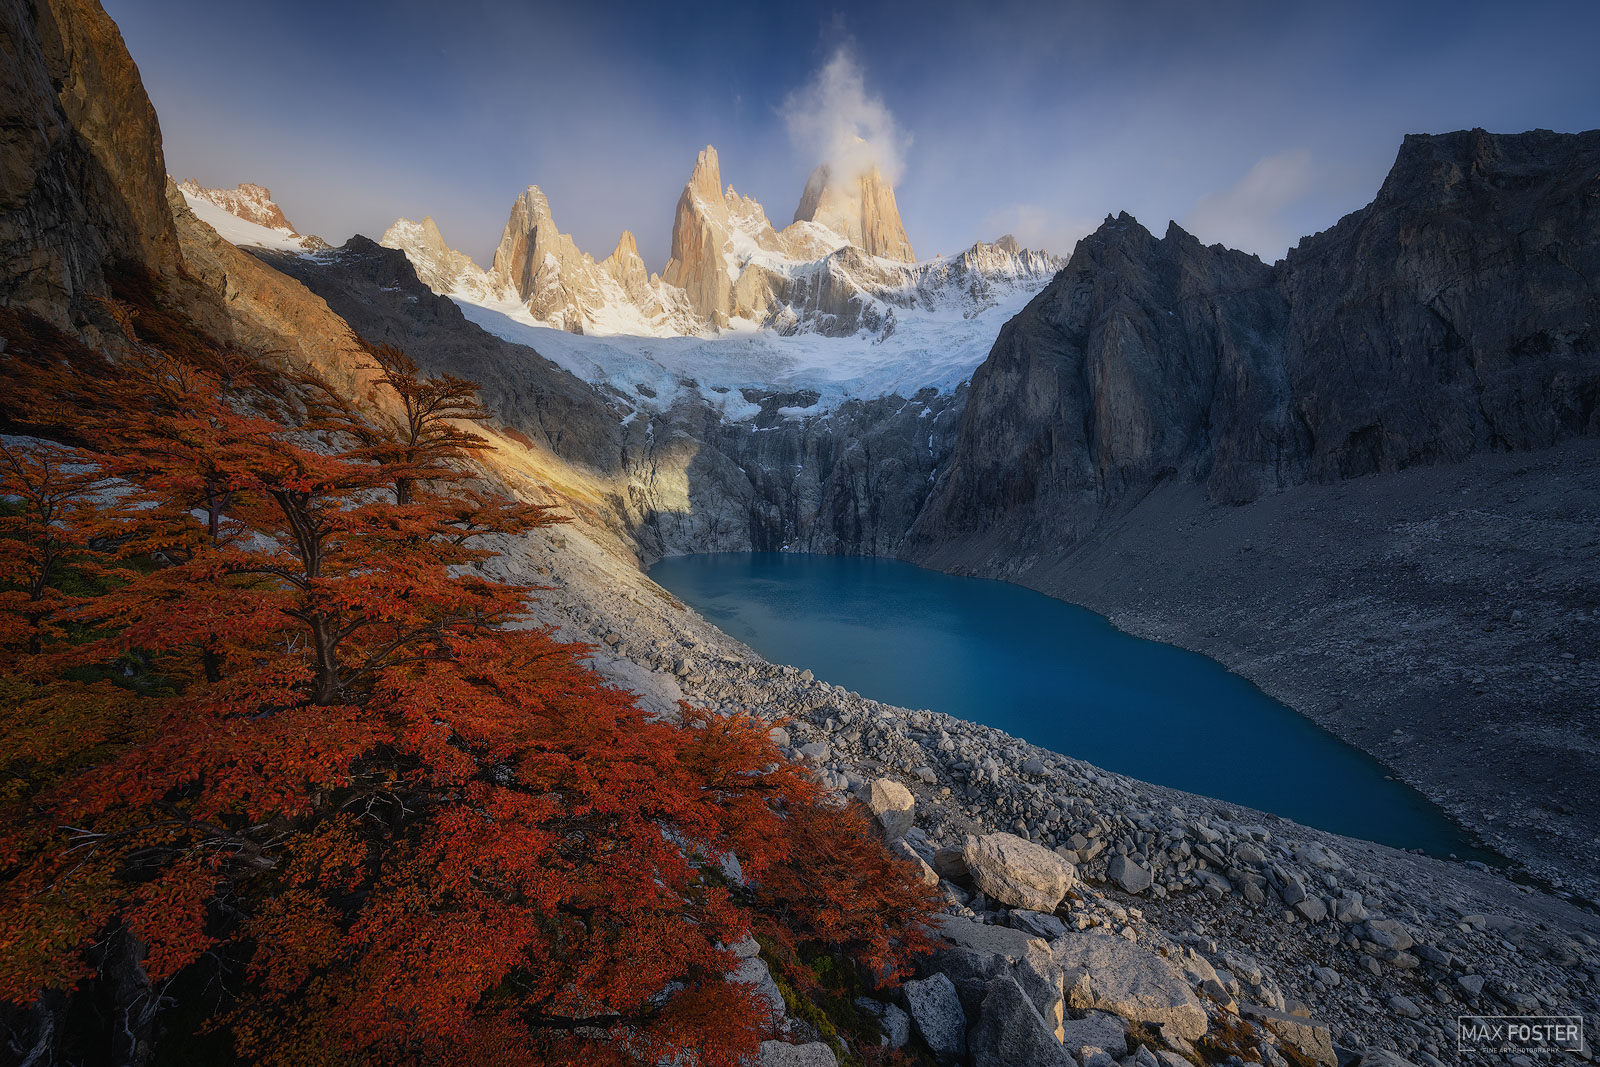 Enhance your home with Vivid Reminiscence, Max Foster's limited edition photographic print of Mount Fitz Roy in Los Glaciares...